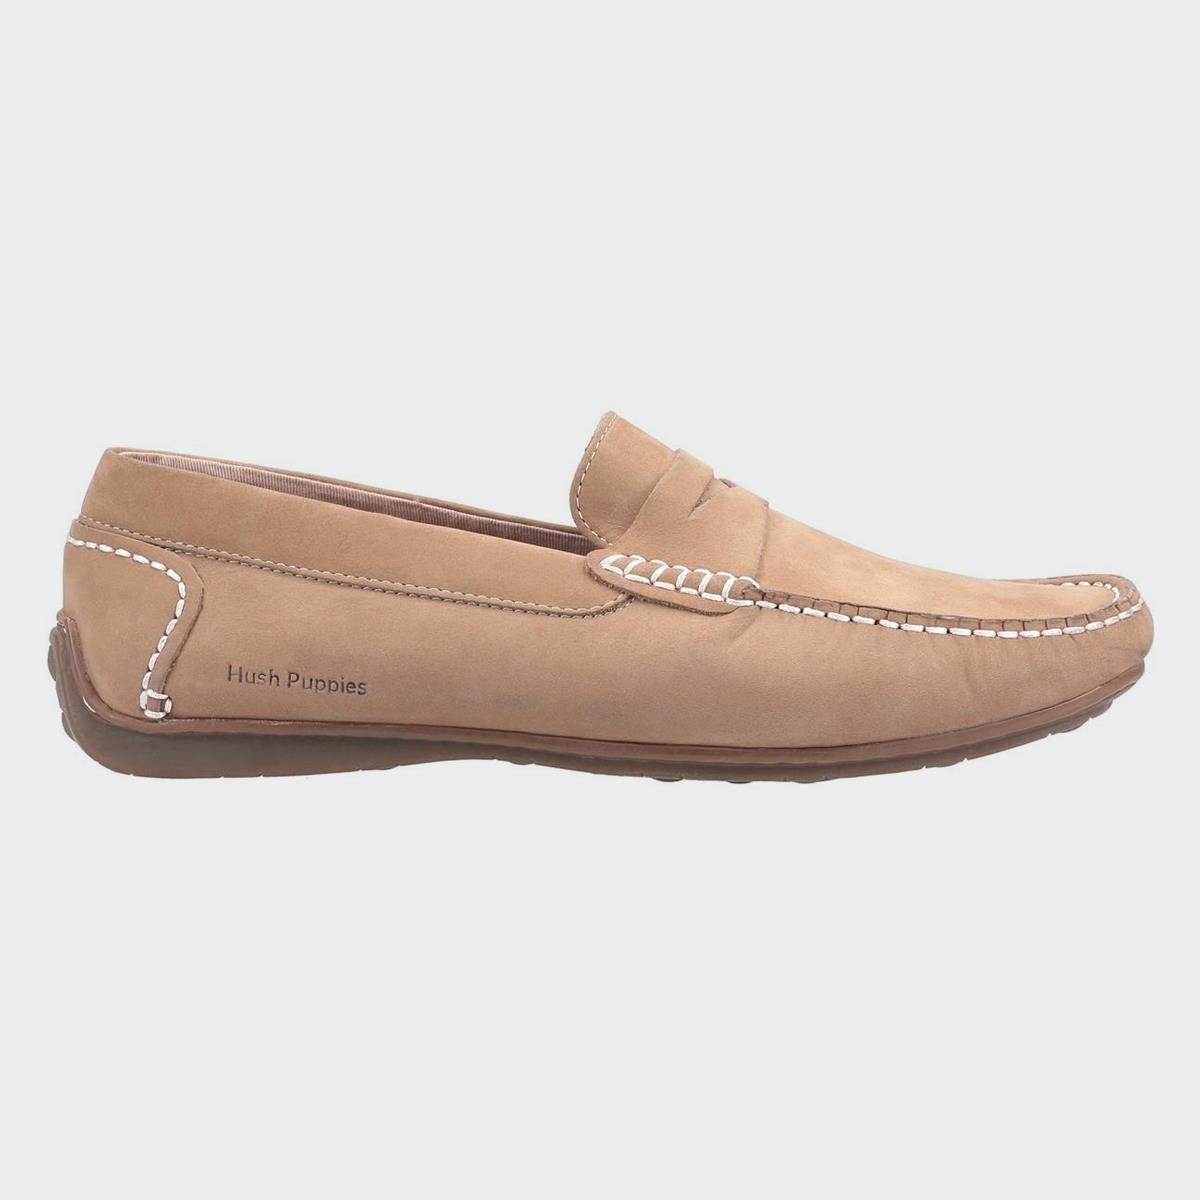 hush puppies shoes on sale